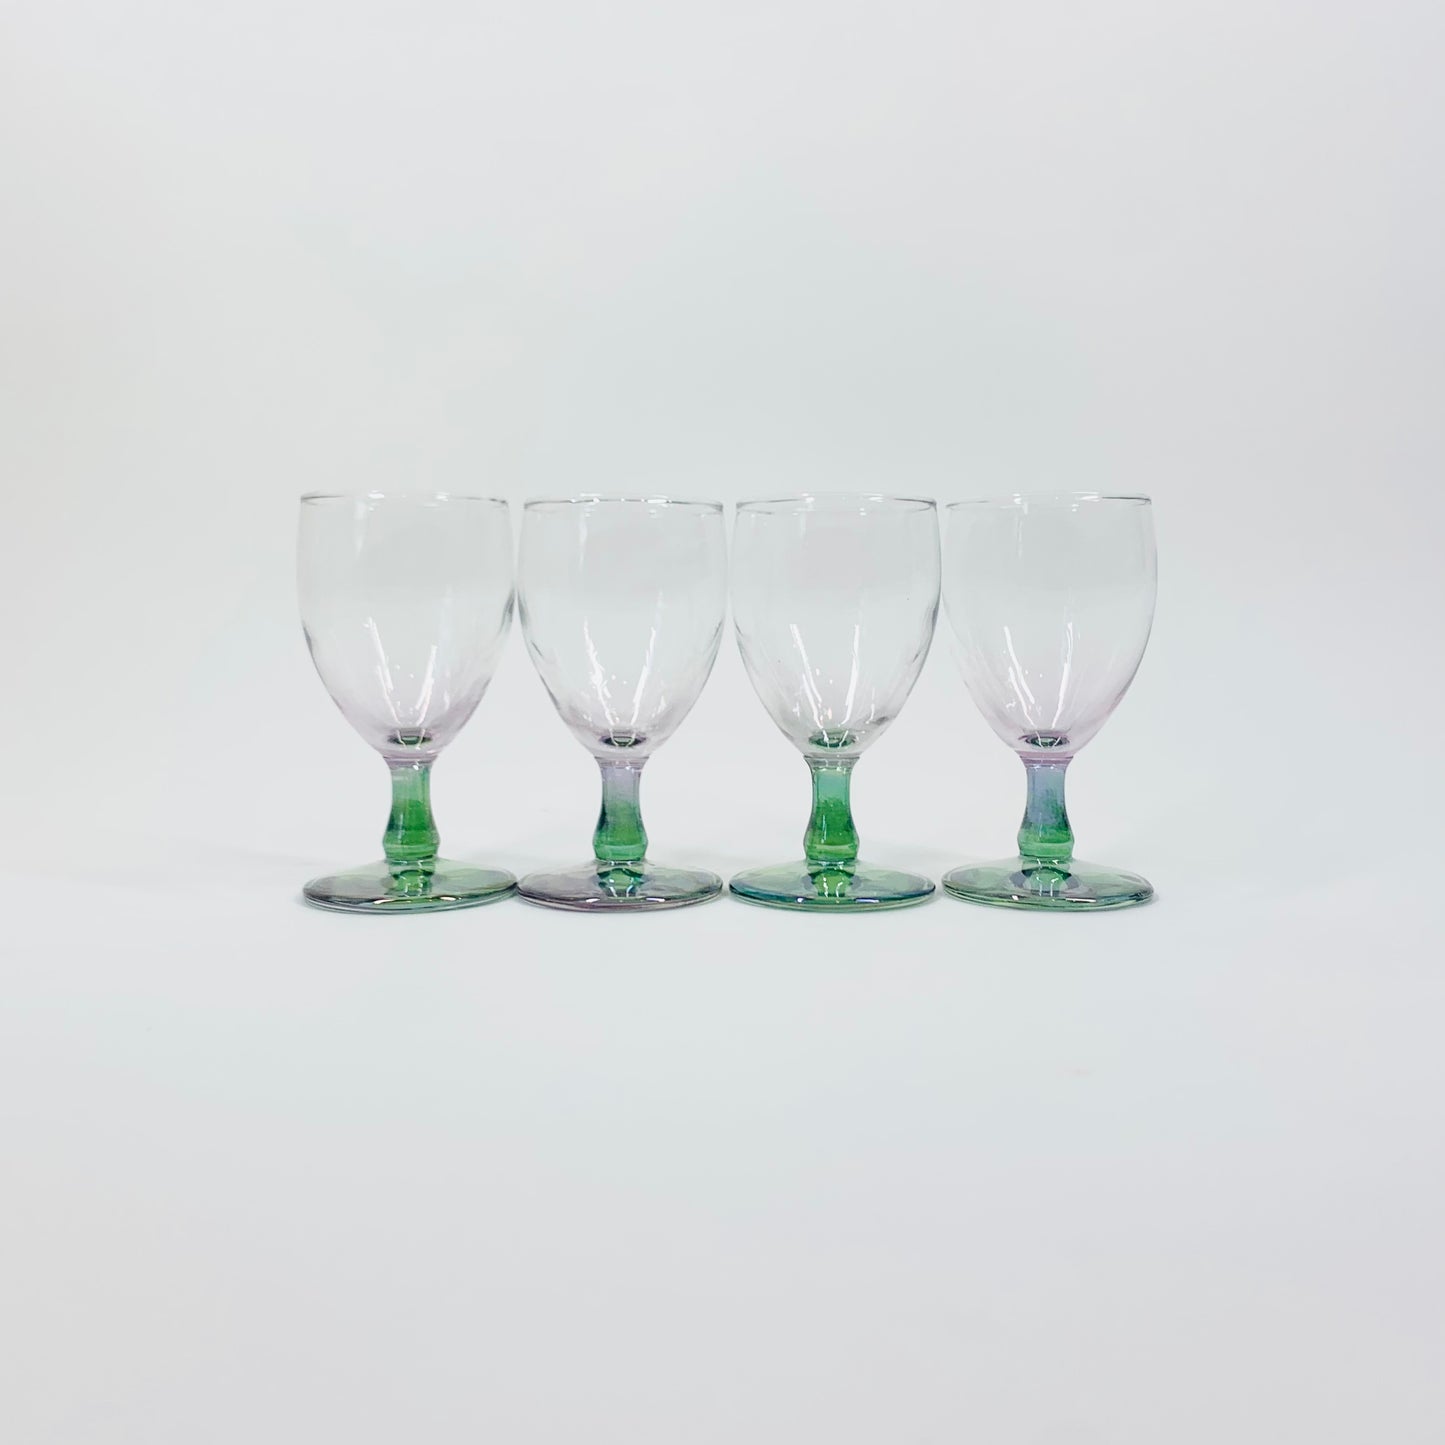 Extremely rare Midcentury American iridescent harlequin pressed glass decanter and matching glasses set